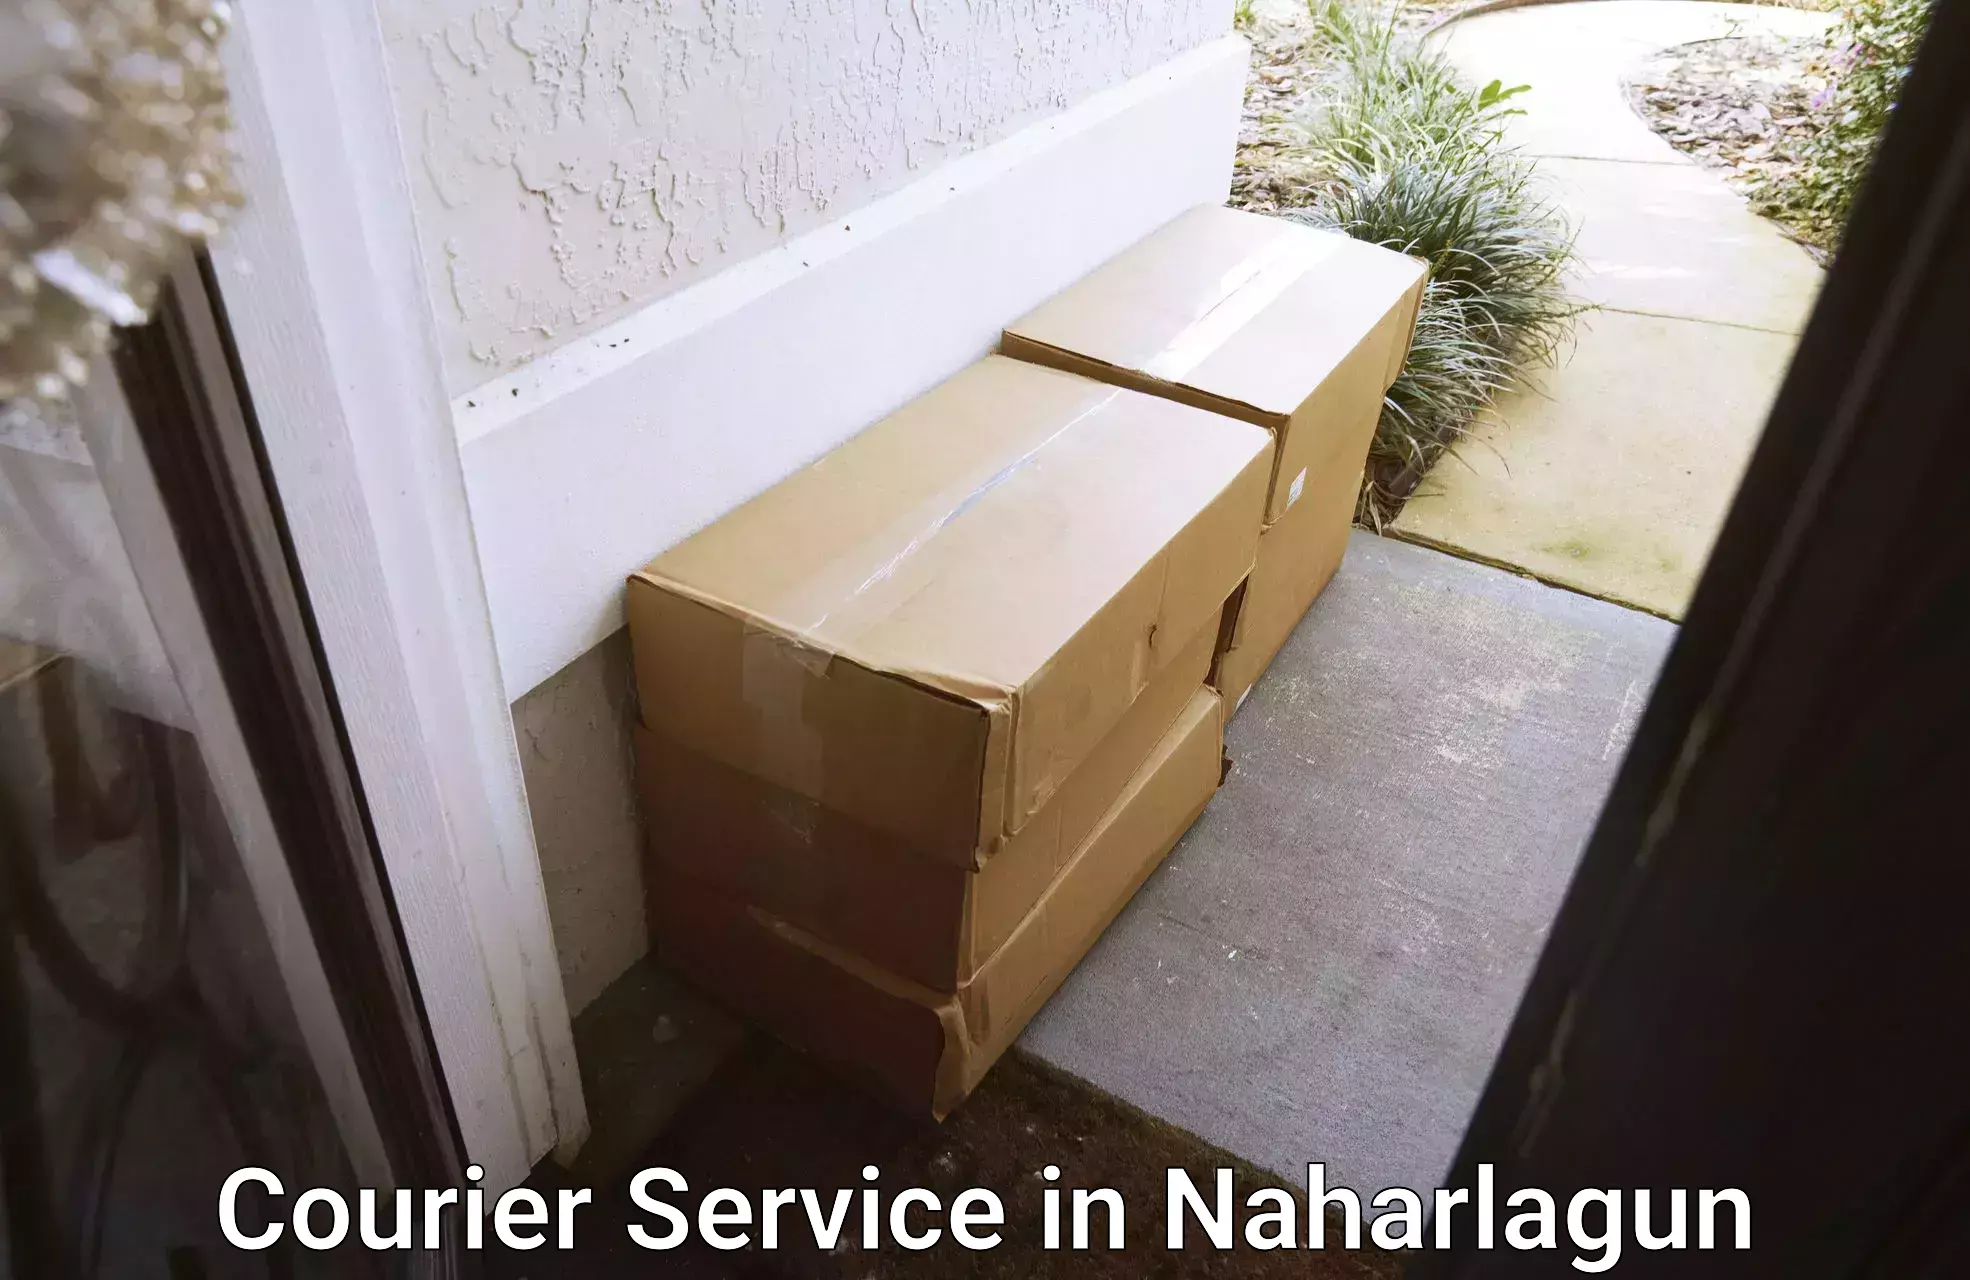 Business delivery service in Naharlagun